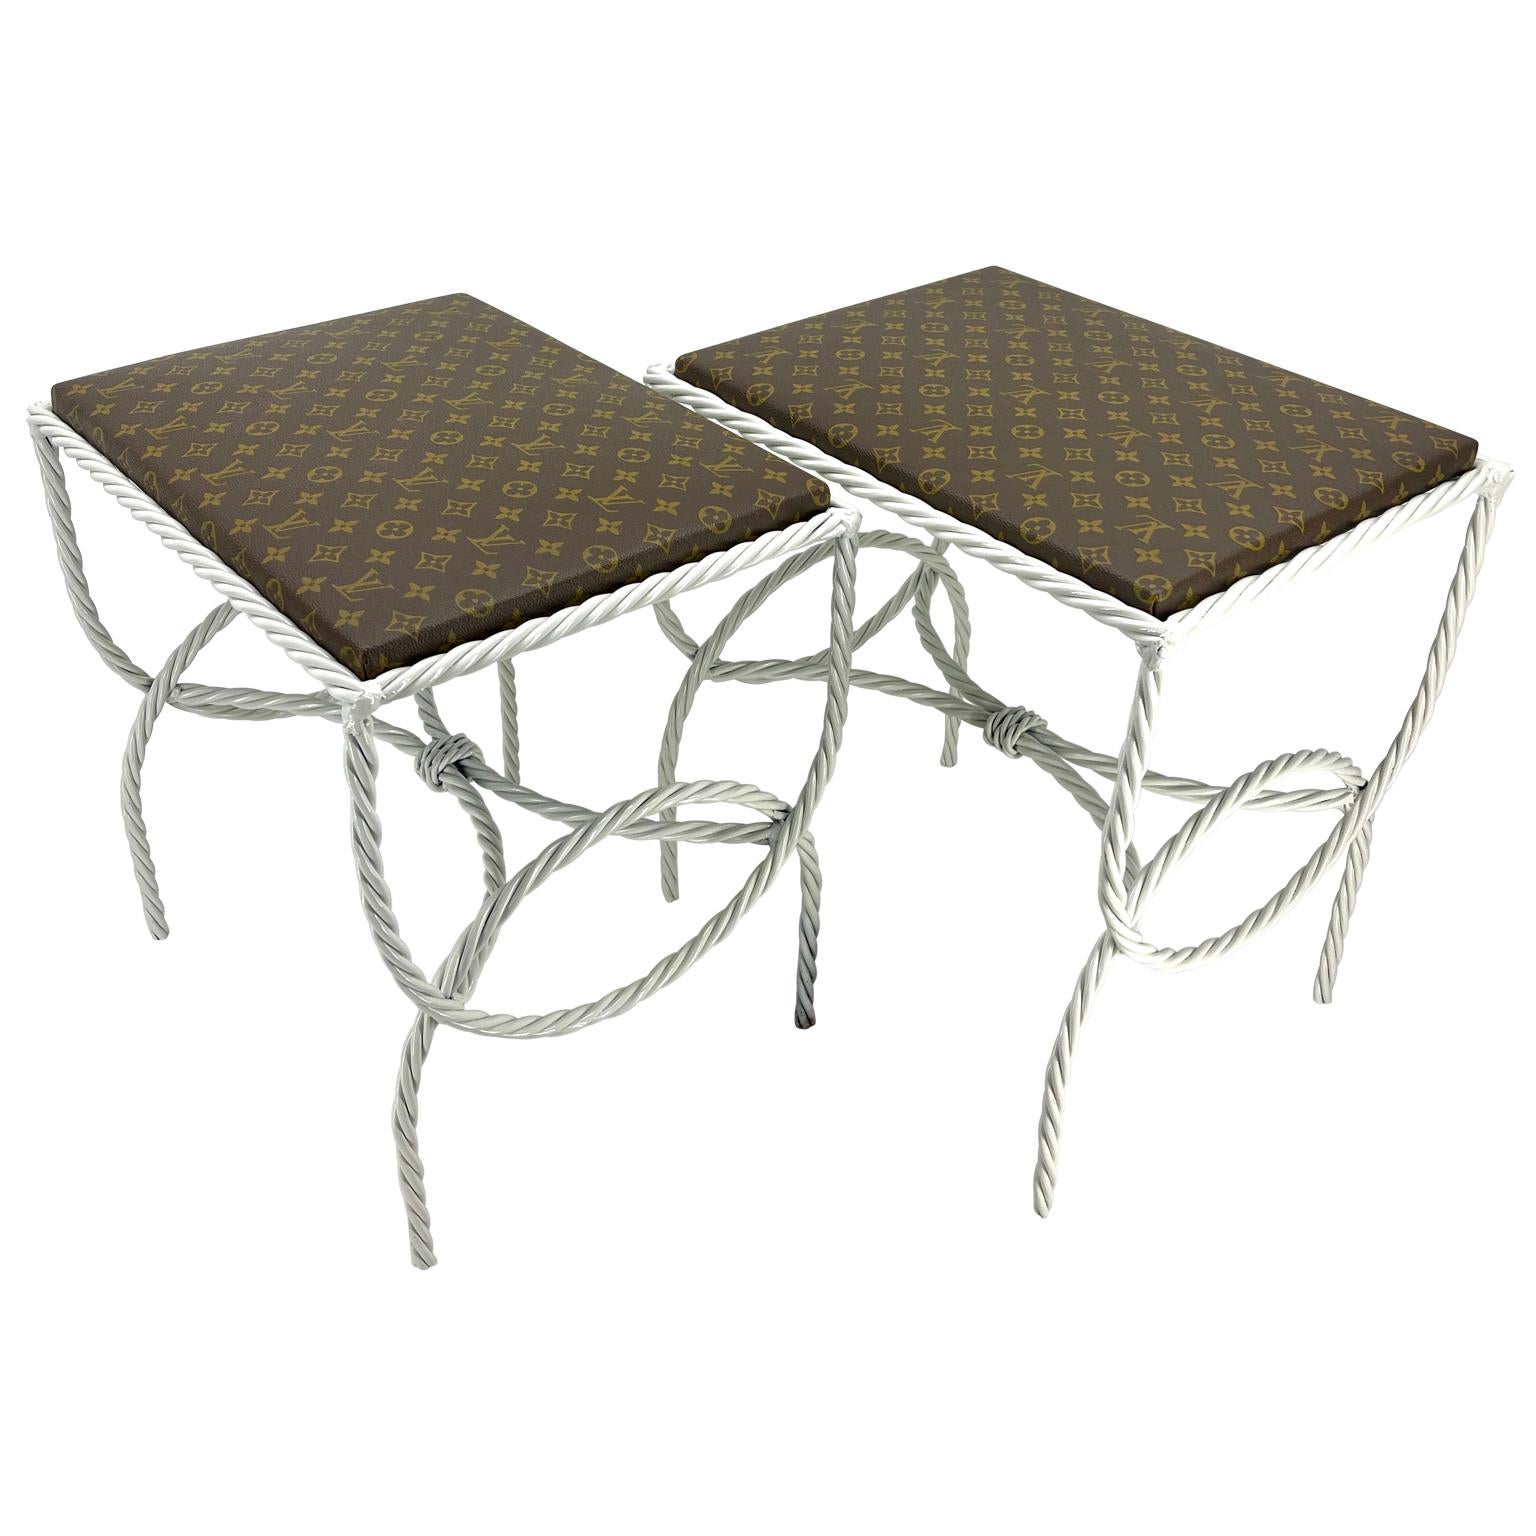 Pair of Roped Iron Benches Side Tables with Louis Vuitton Monogram Fabric